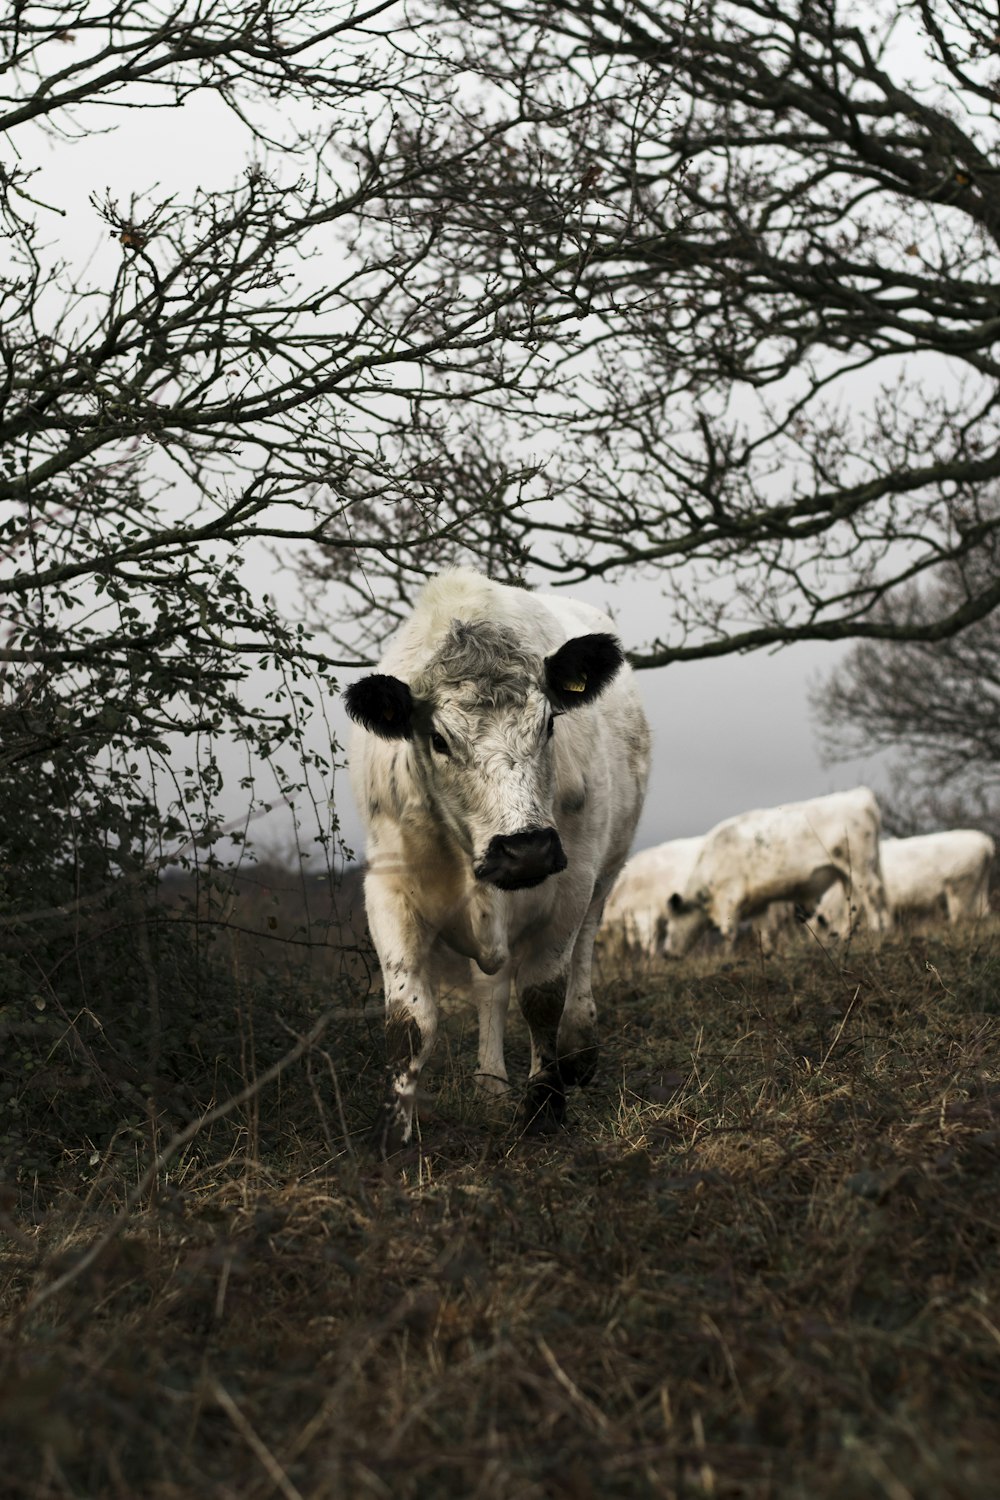 white cow on grassy field under bare trees